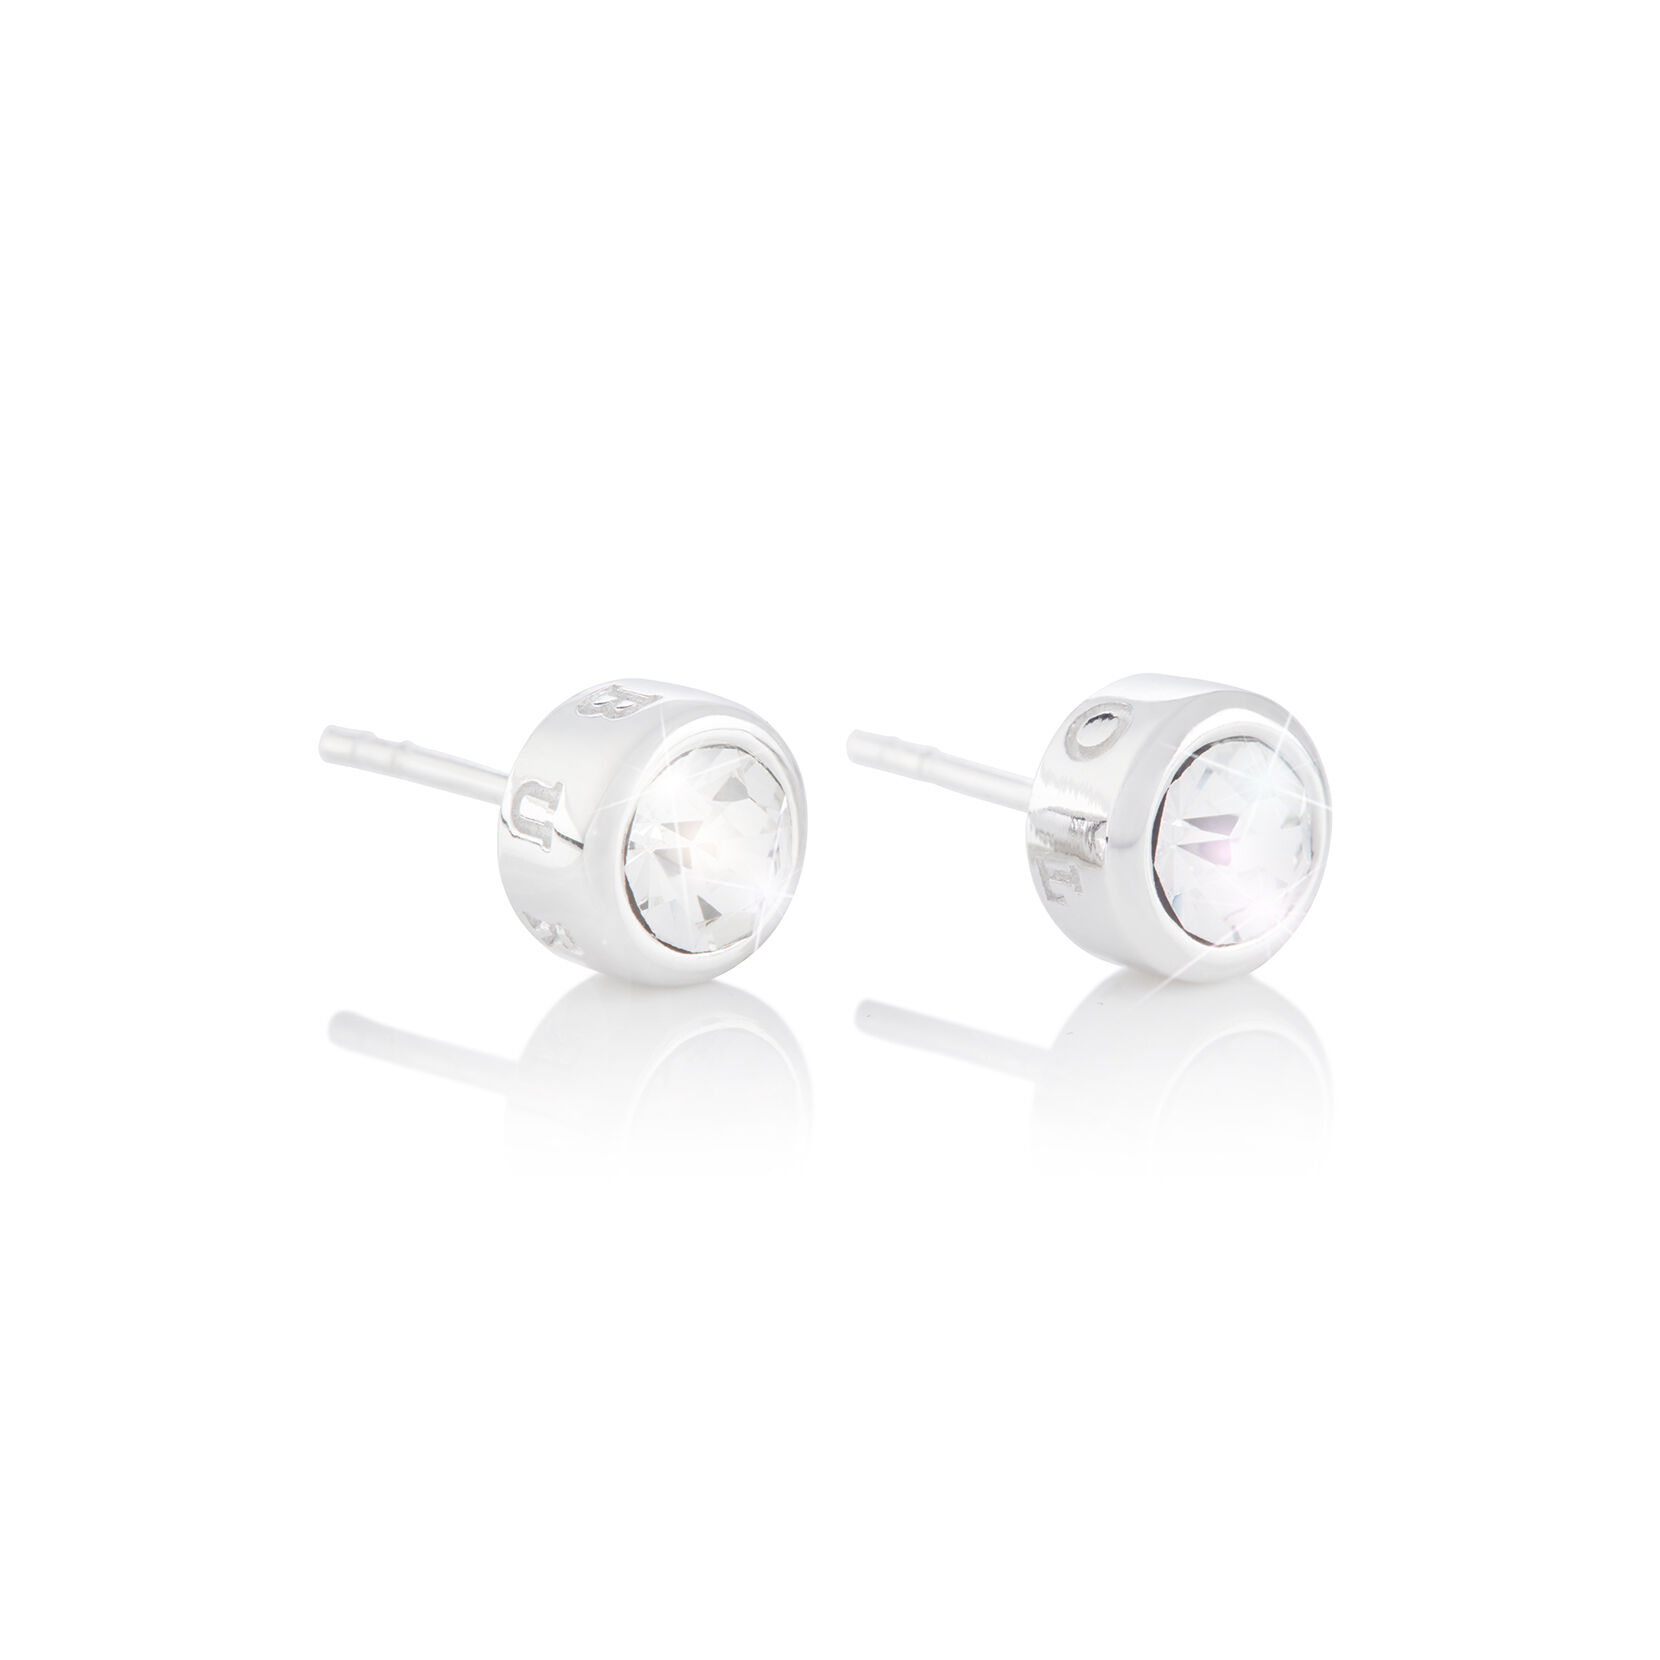 Bejeweled Classics Silver Round Stud Earrings